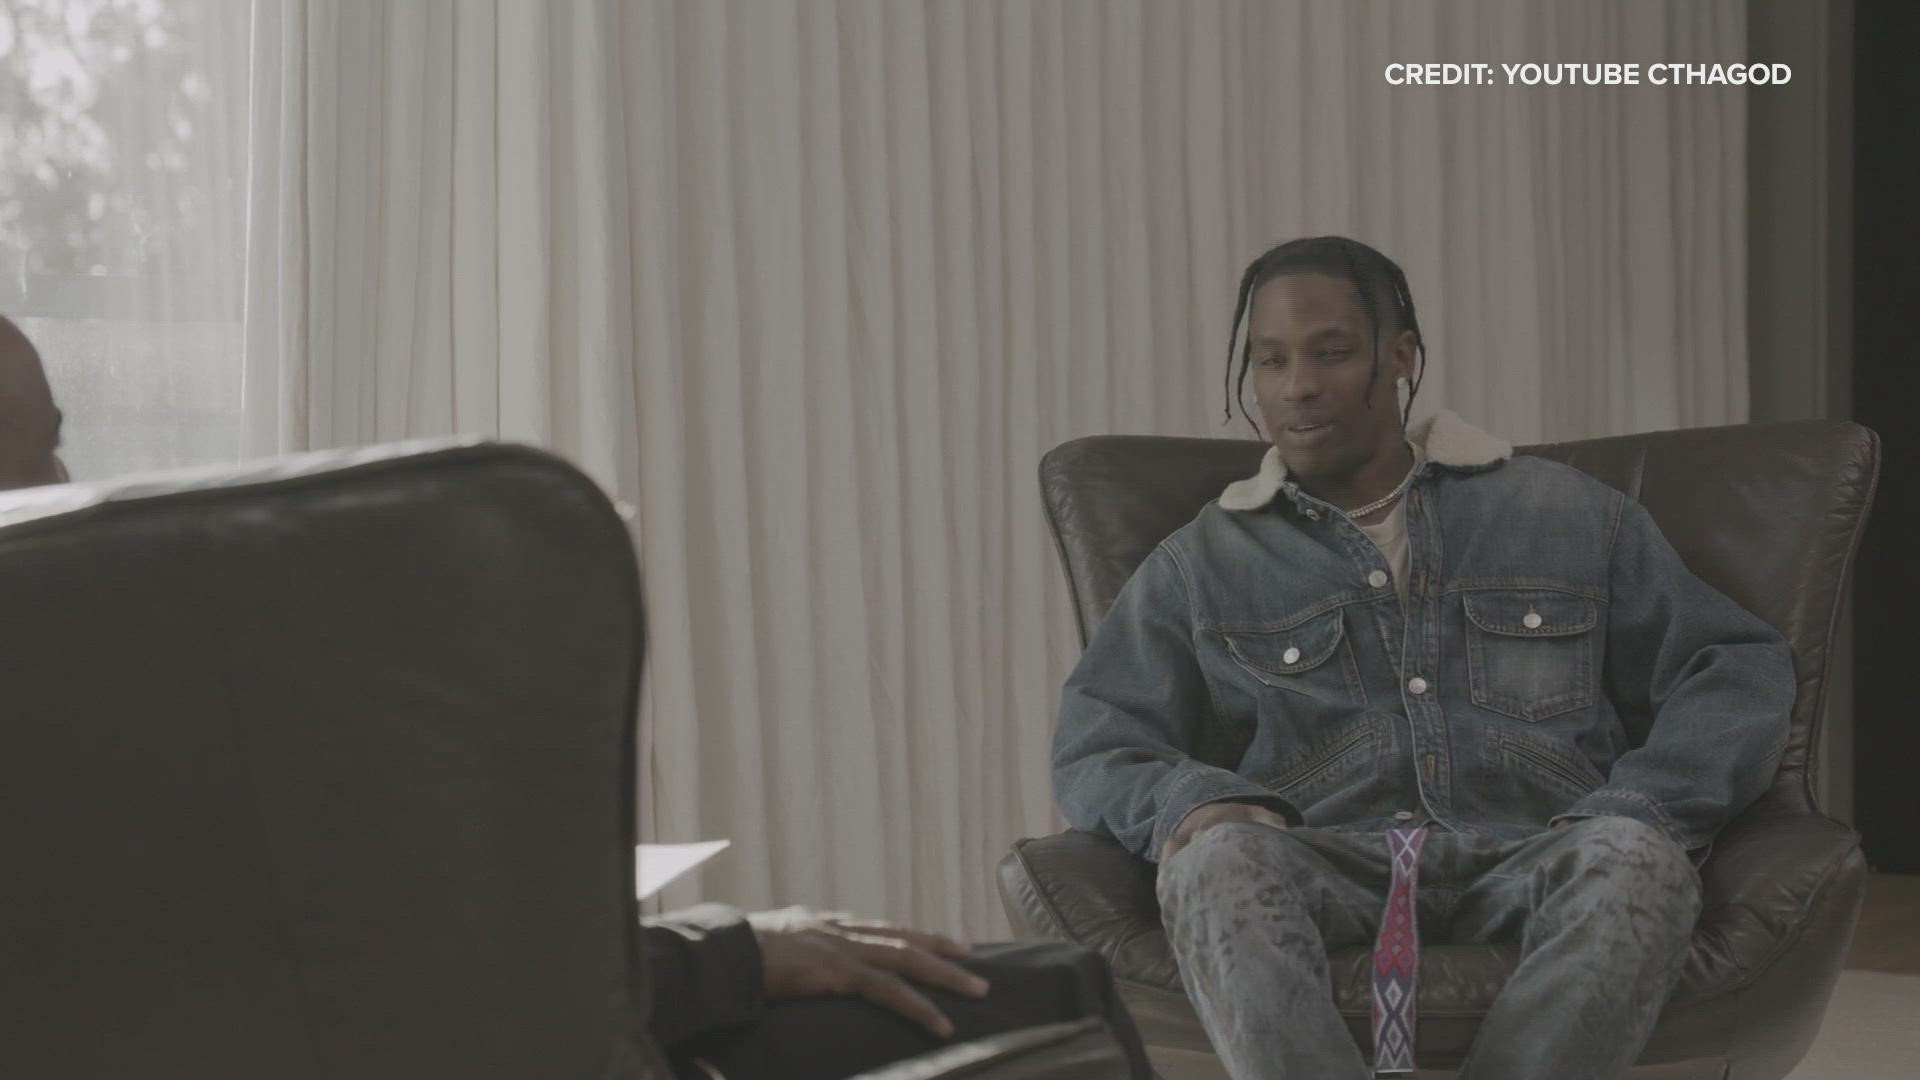 Travis Scott sat down with radio personality Charlamagne Tha God for his first interview since the tragedy at Astroworld Festival a month ago.